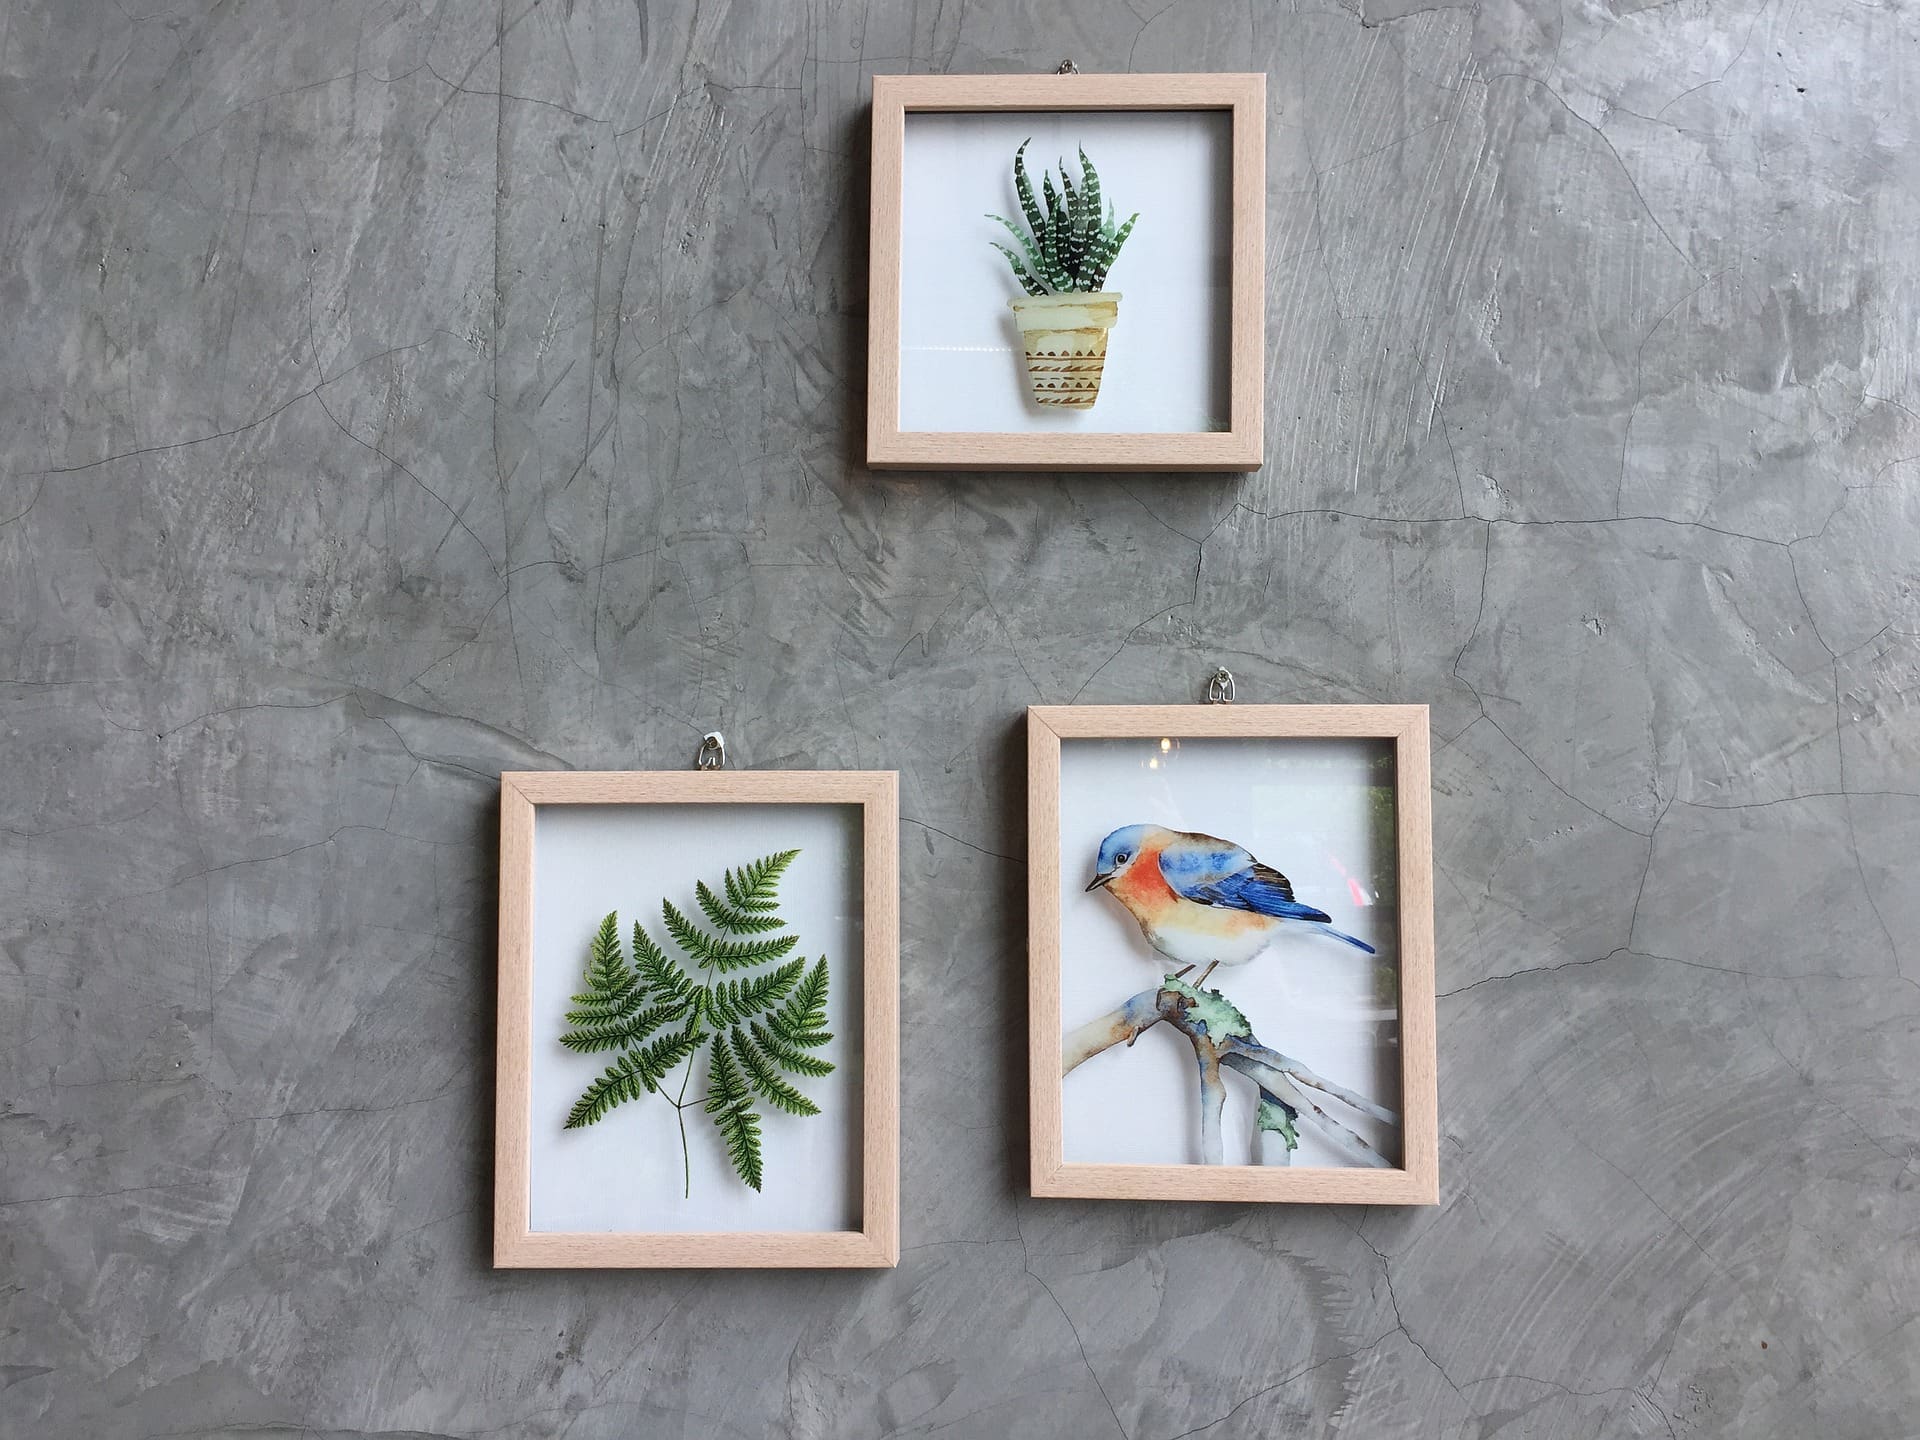 Three framed pictures of plants and a bird hanging on the wall.